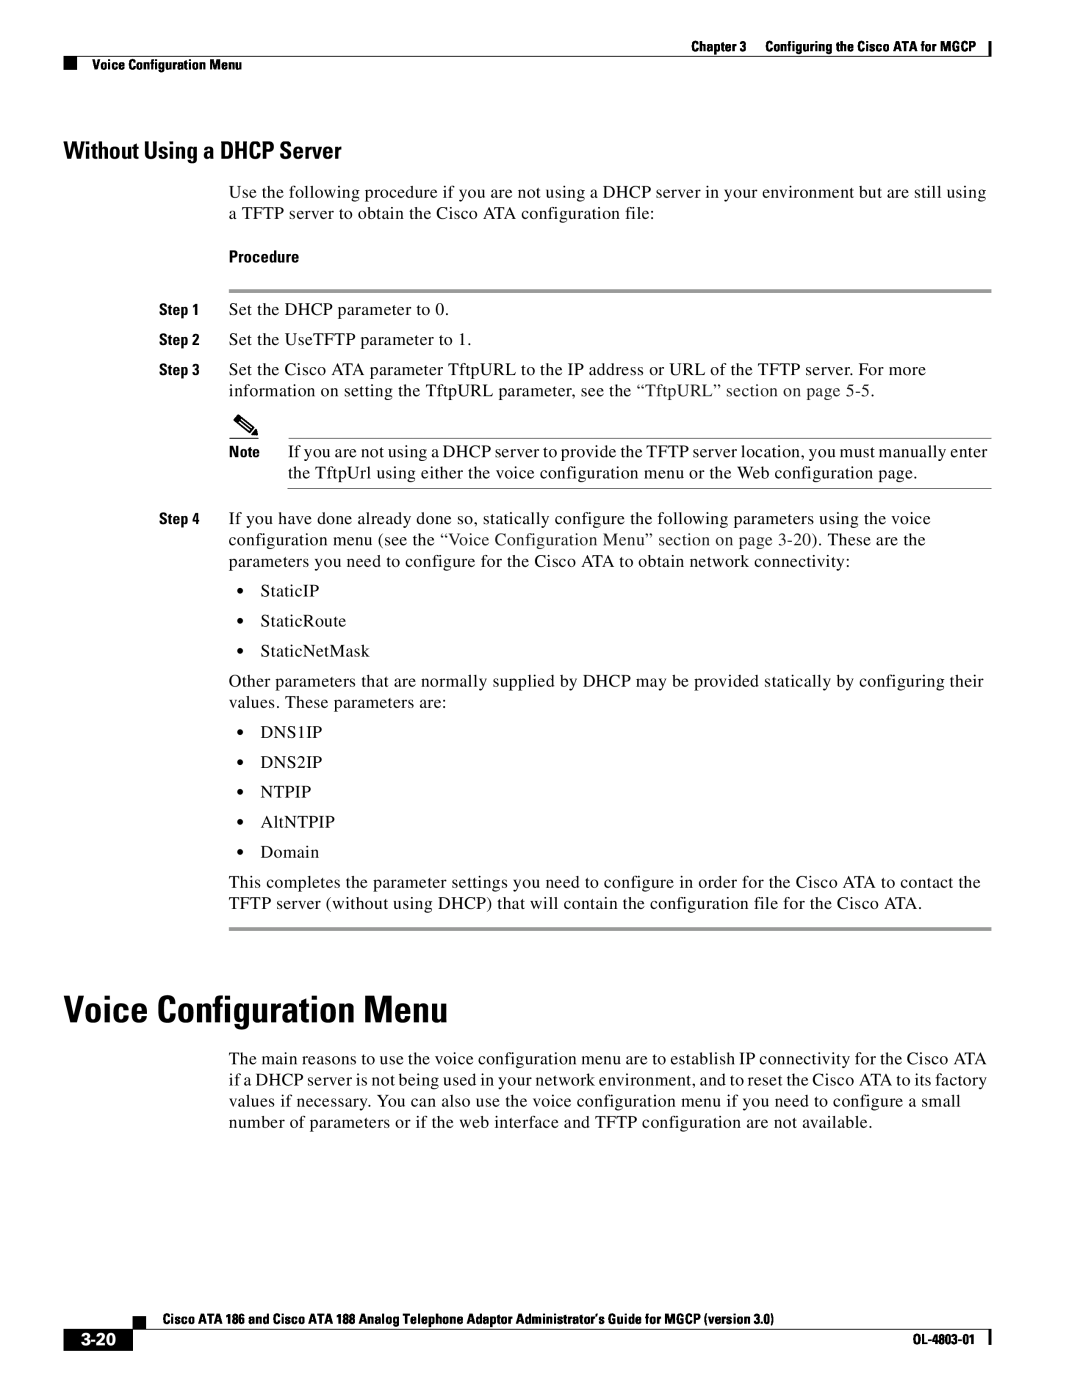 Cisco Systems ATA 186 manual Voice Configuration Menu, Without Using a DHCP Server, 3-20, Procedure 